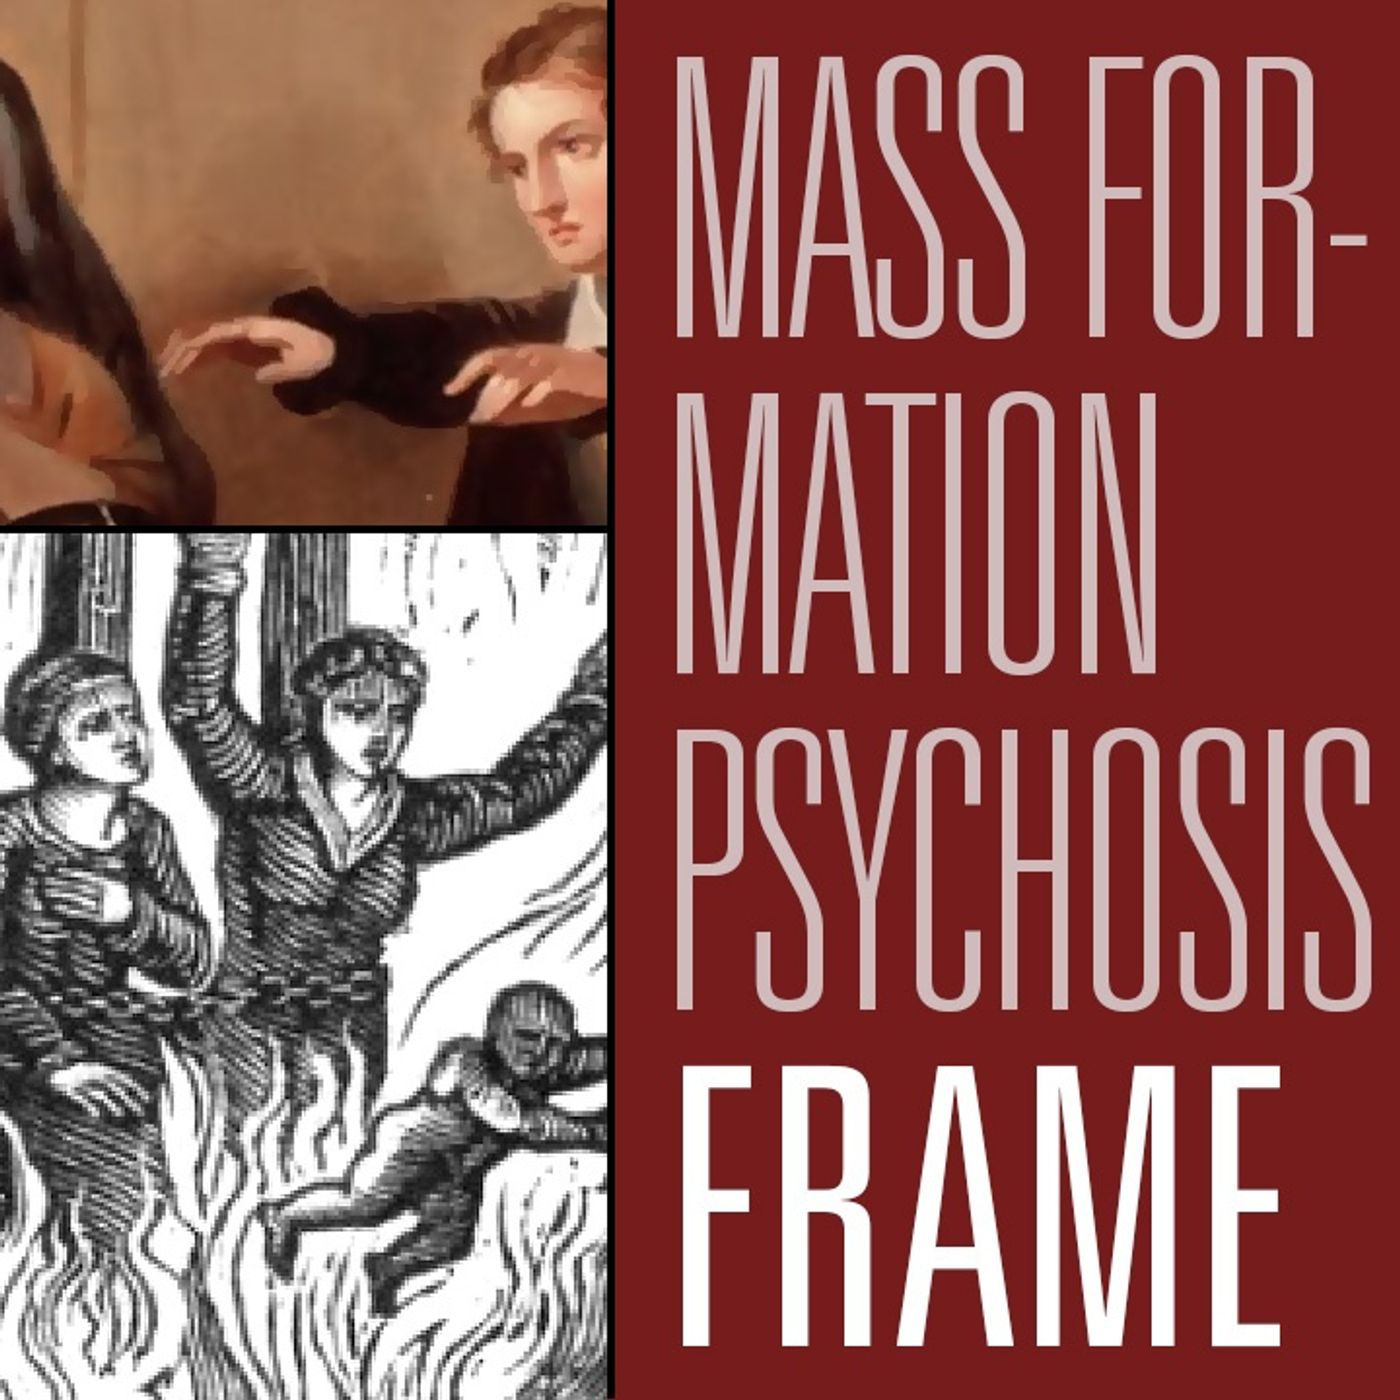 David Packman's 3 defences against being accused of Mass Formation Psychosis | Maintaining Frame 6